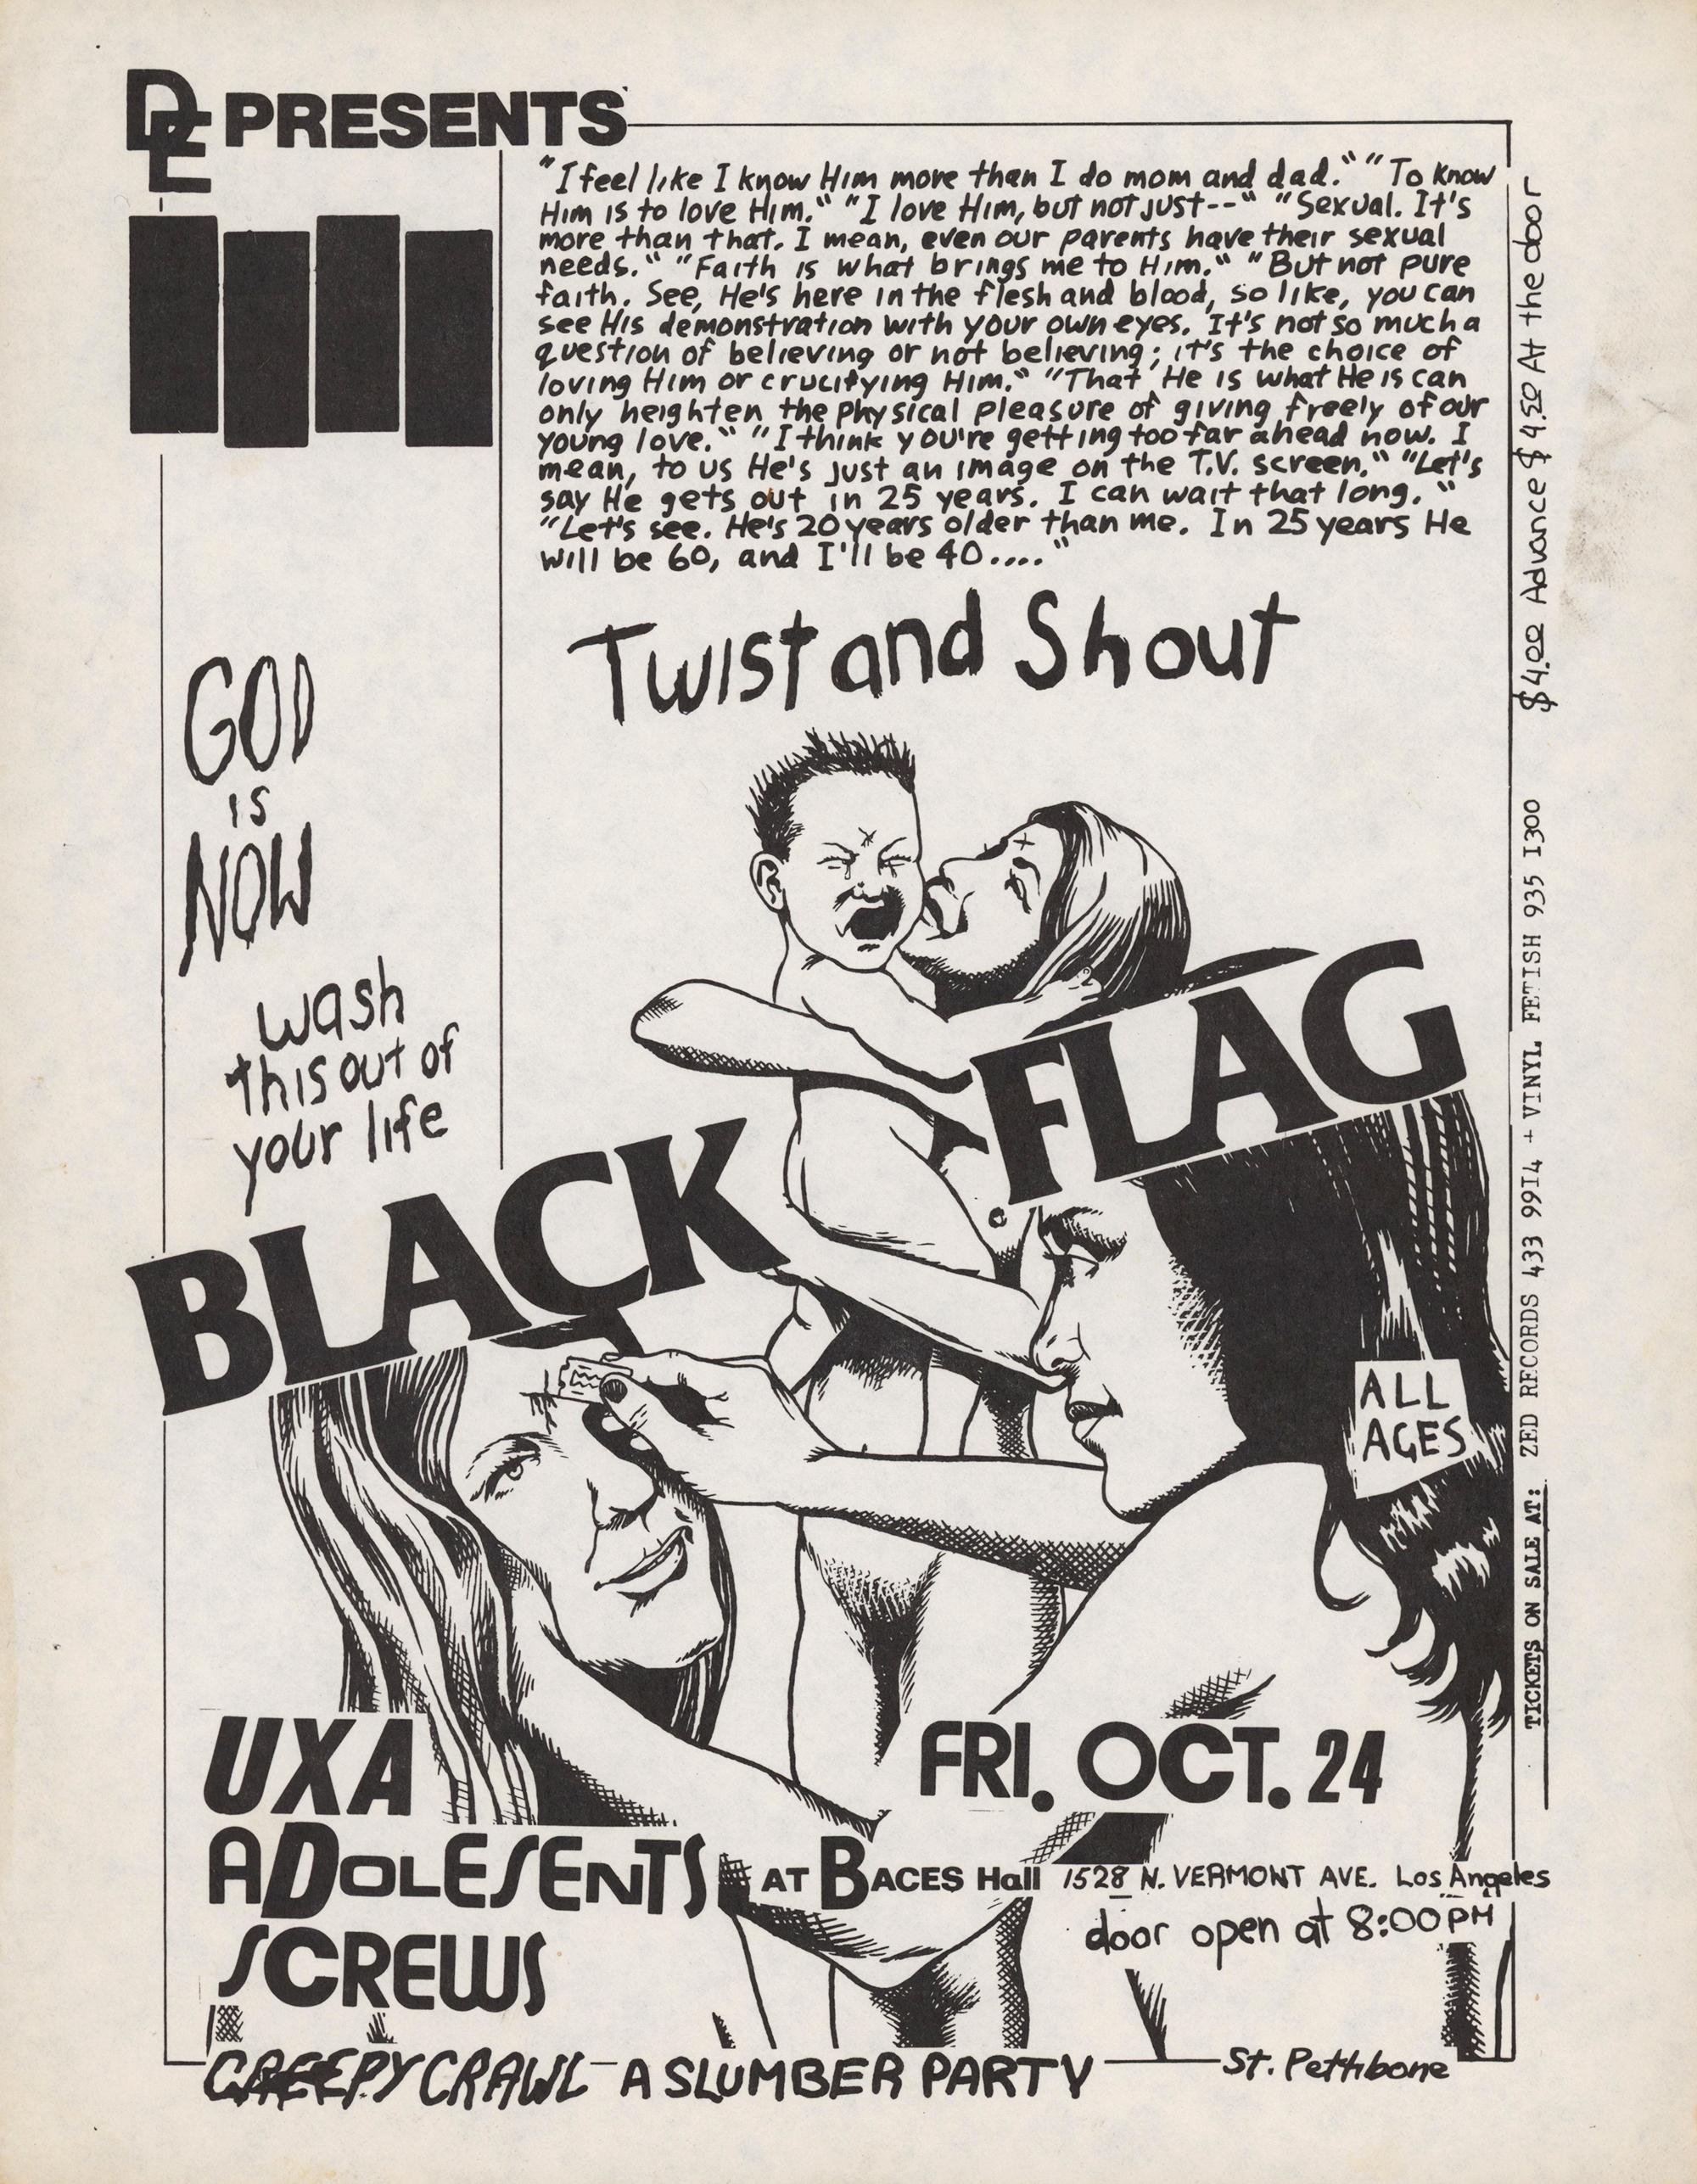 Raymond Pettibon illustrated Black Flag flyer New York City 1981:
Rare early 1980s Punk flyer illustrated by Pettibon to advertise one of Black Flag’s first ever East Coast shows held at the Peppermint Lounge, New York, NY: March 14, 1981.

Flea,